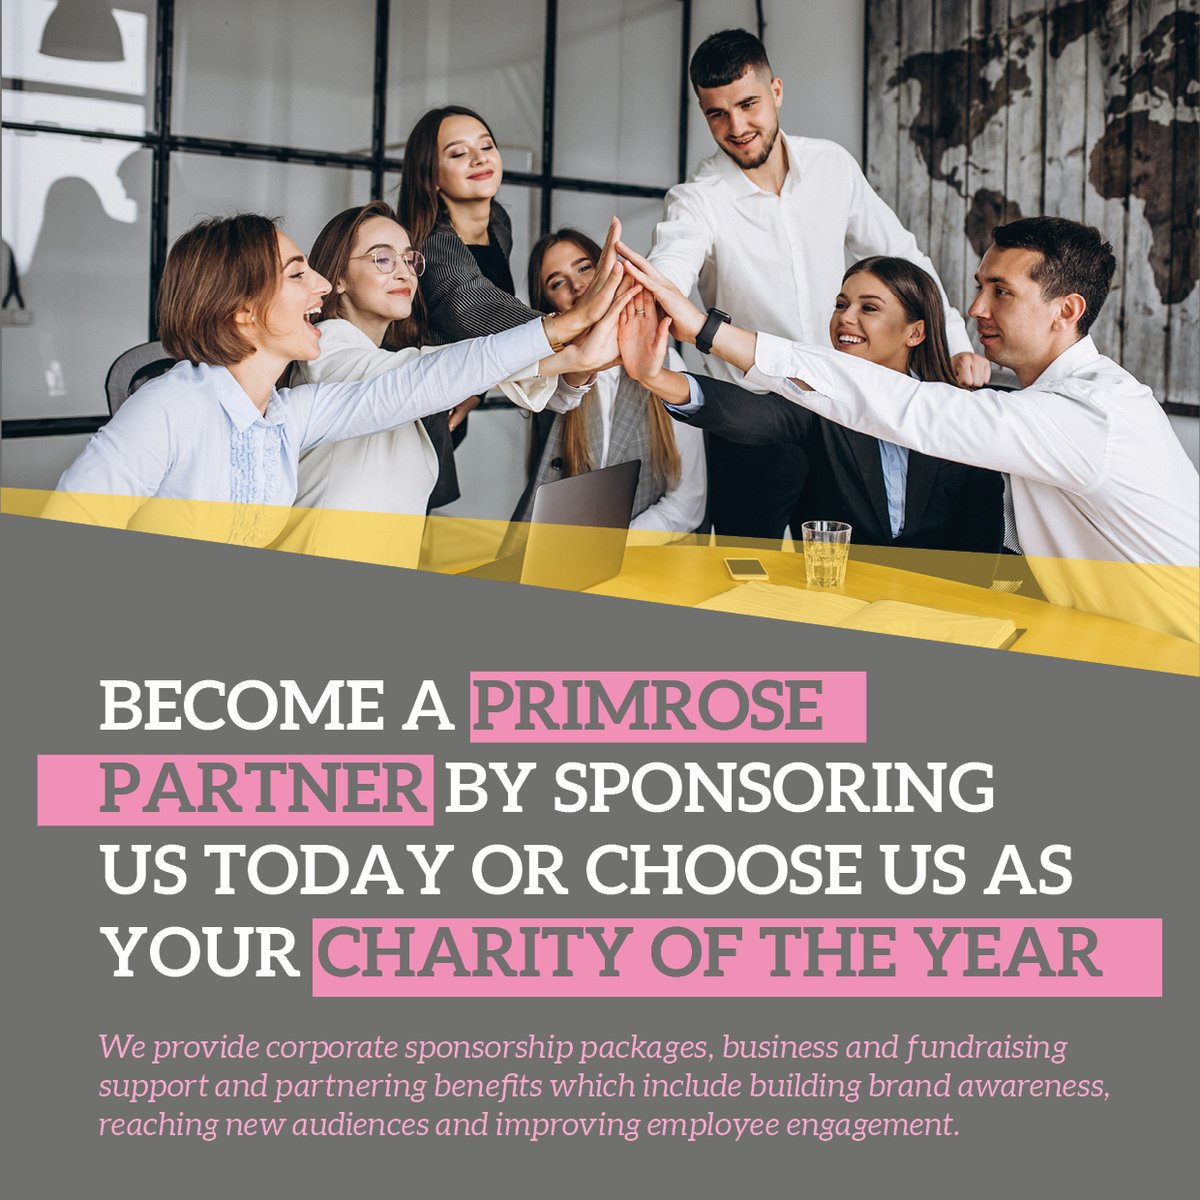 Become a corporate sponsor today and help us ensure the best possible breast care services are provided to patients and their families across West Devon and East Cornwall. primrosefoundation.org/become-a-corpo… #corporatesponsor #charity #sponsor #breastcancersupport #localbusiness